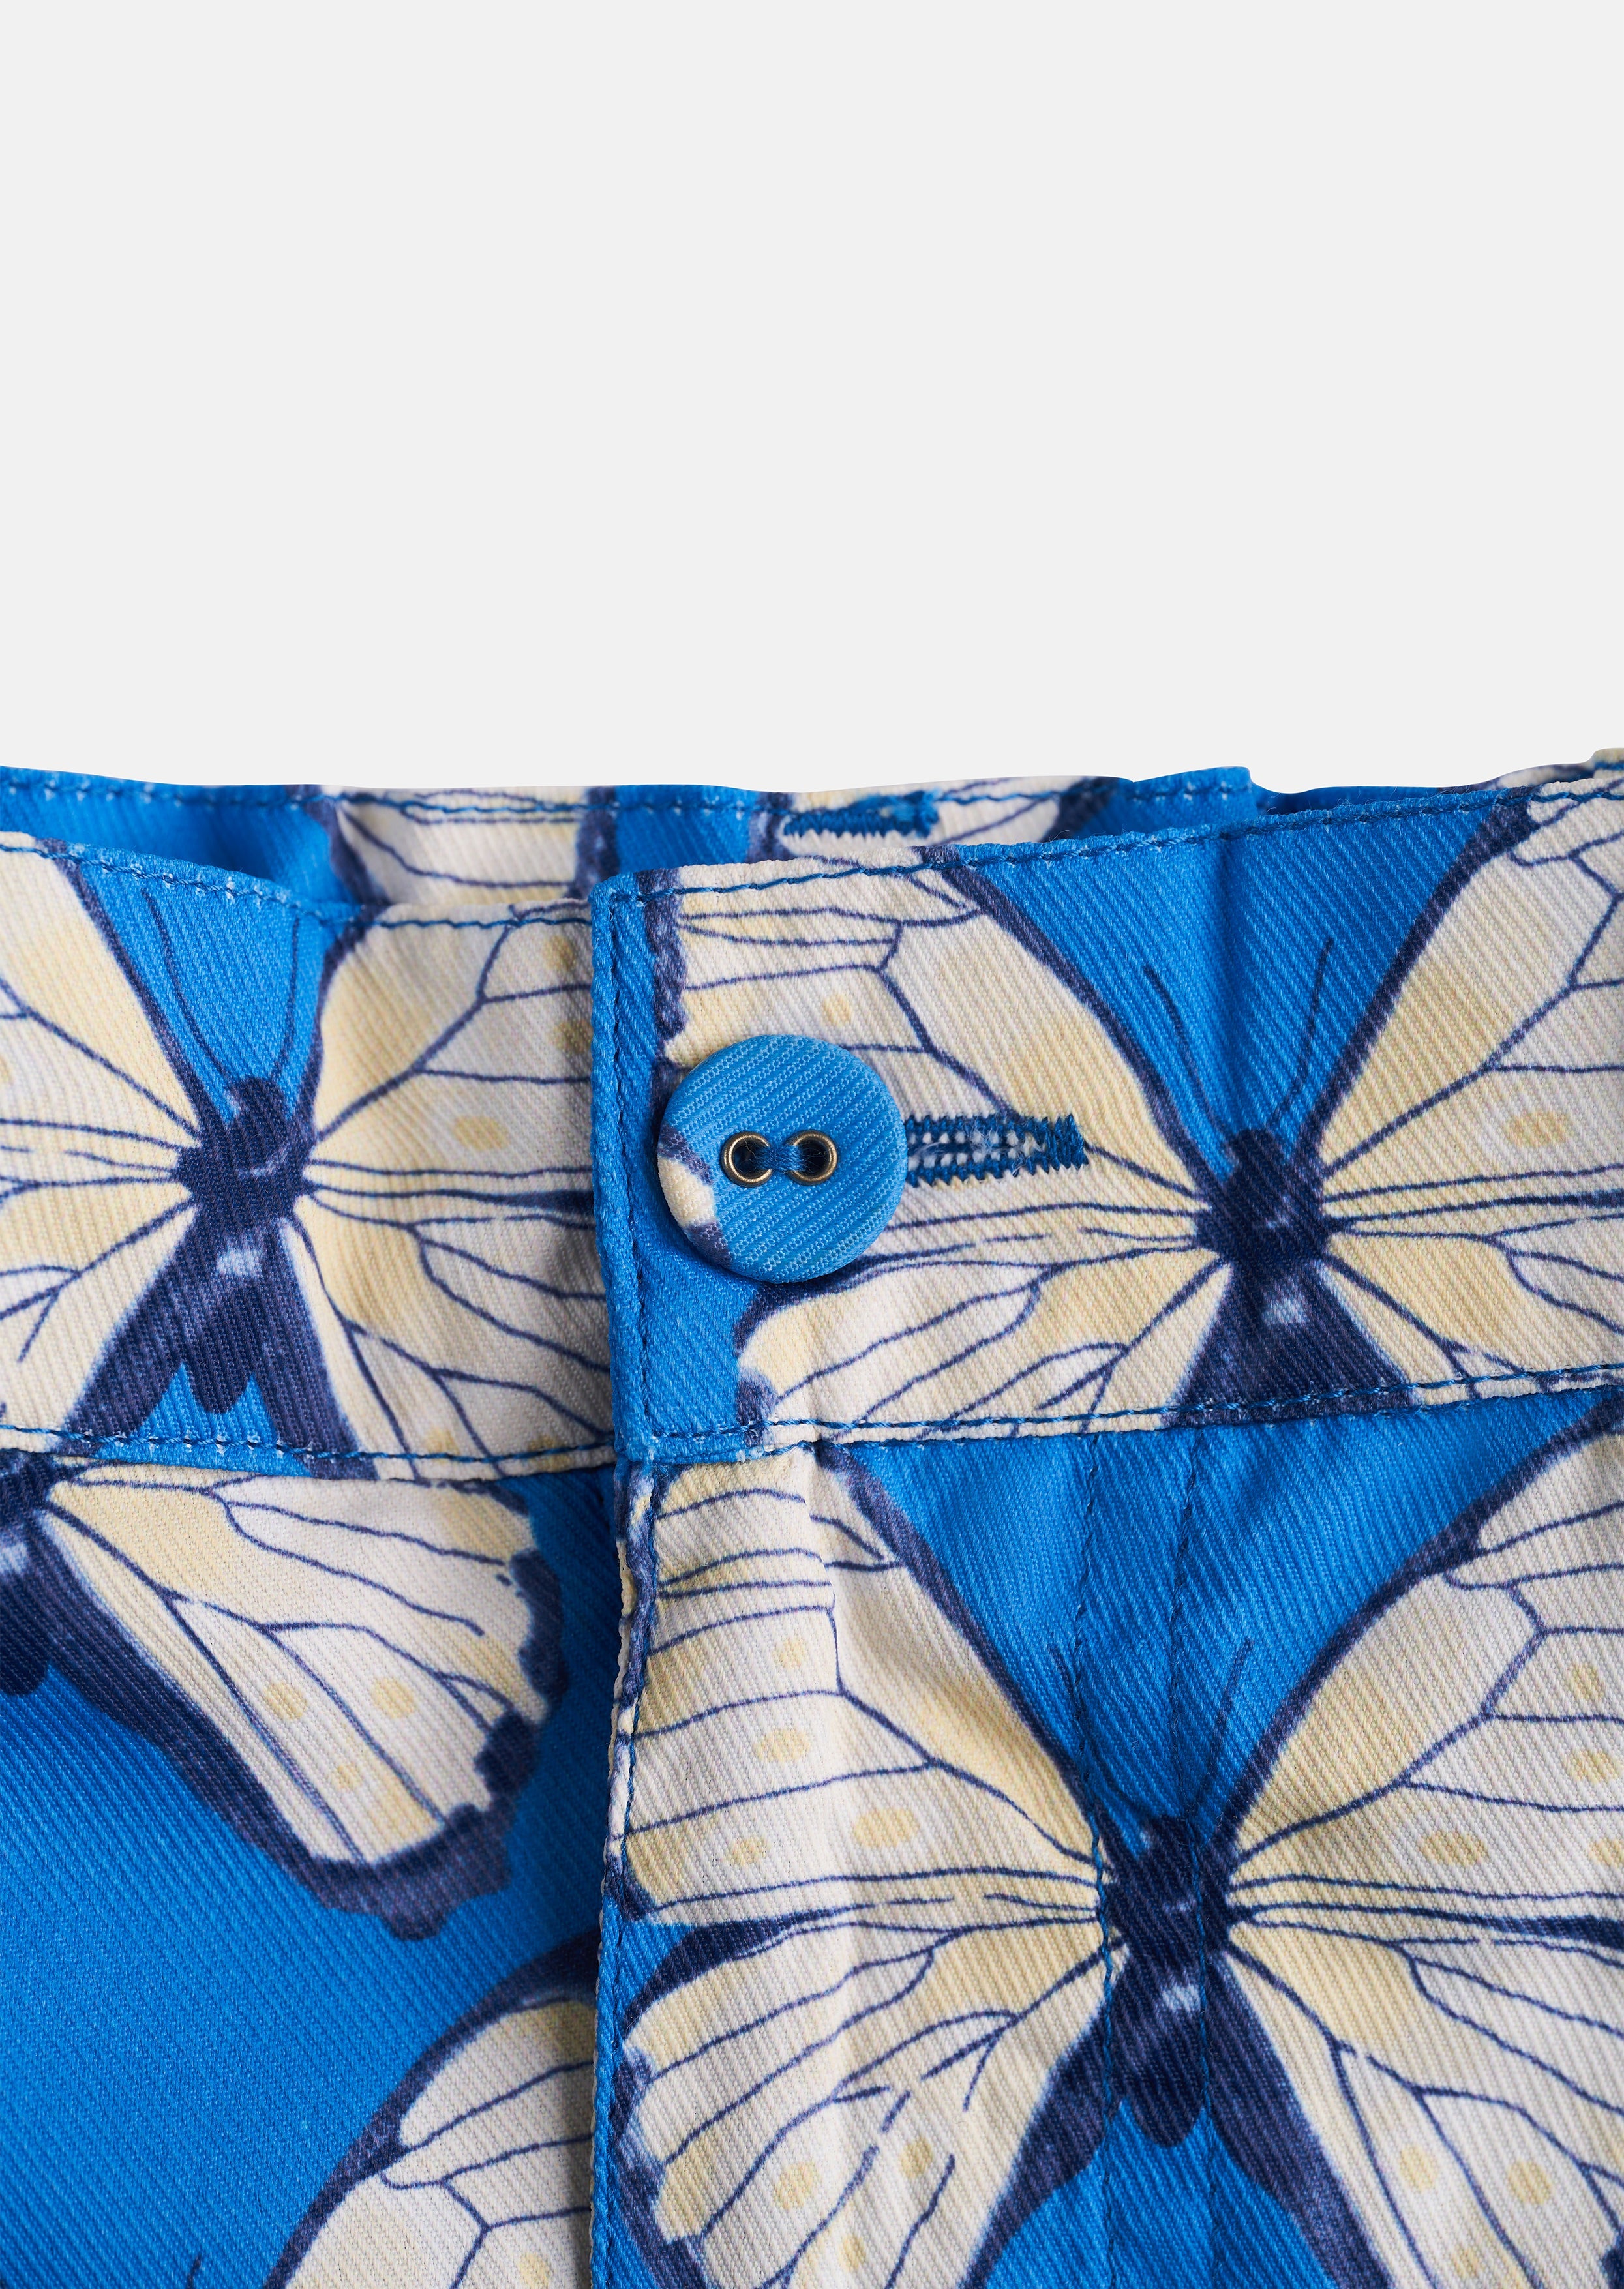 Girls Blue Butterfly Printed Shorts